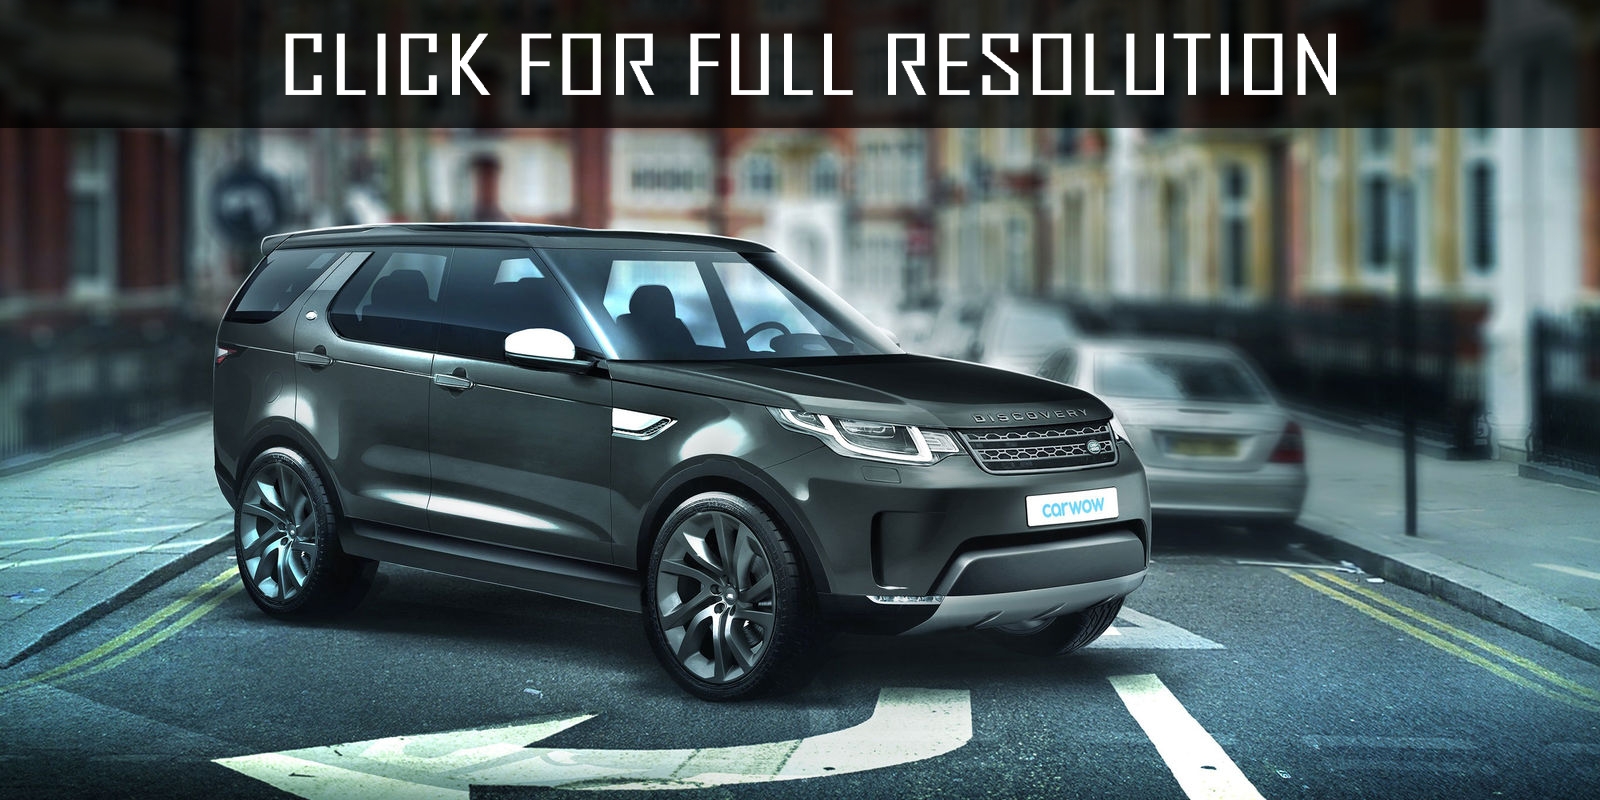 2018 Land Rover Discovery 5